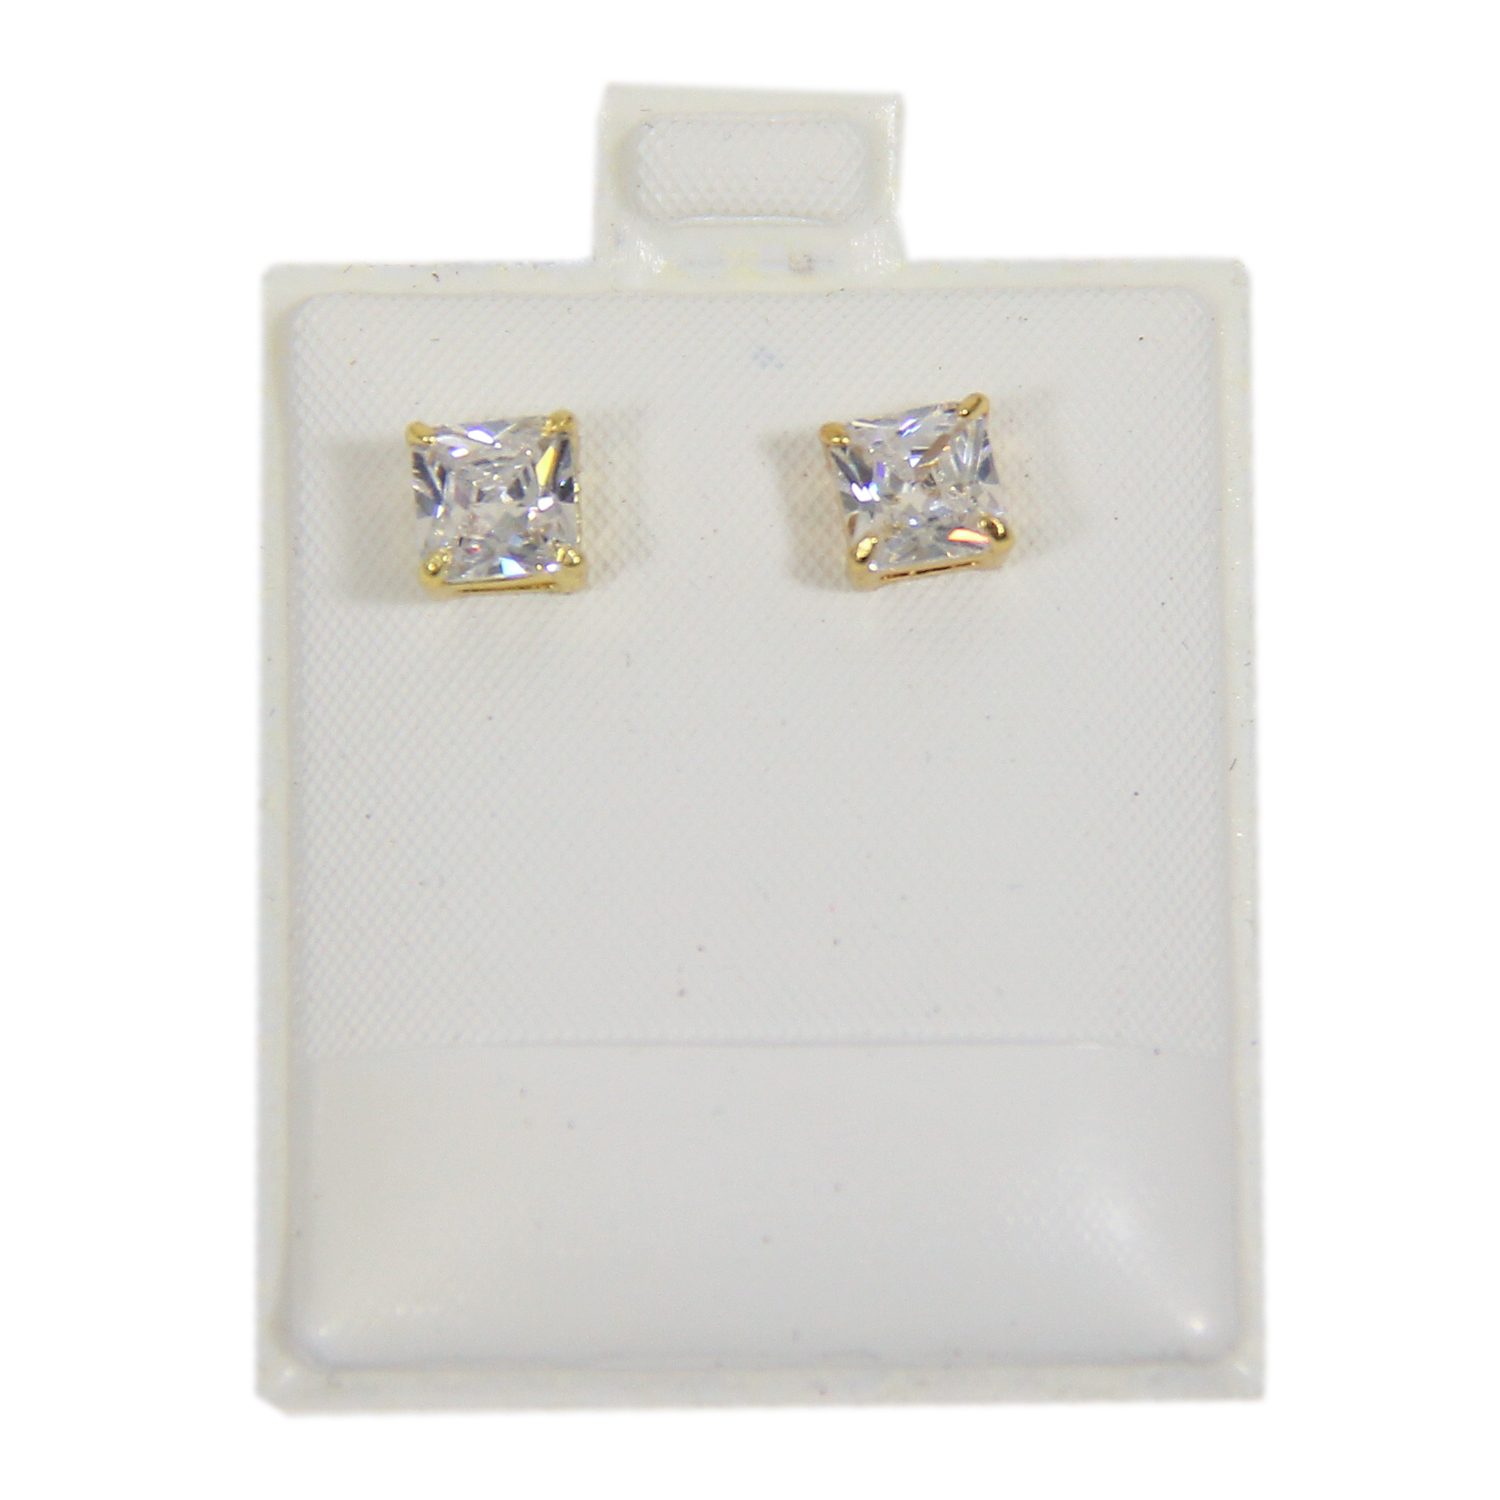 100 Earring White Puff Card Jewelry Case Display Pads 1 1/2" x 1 3/4" 